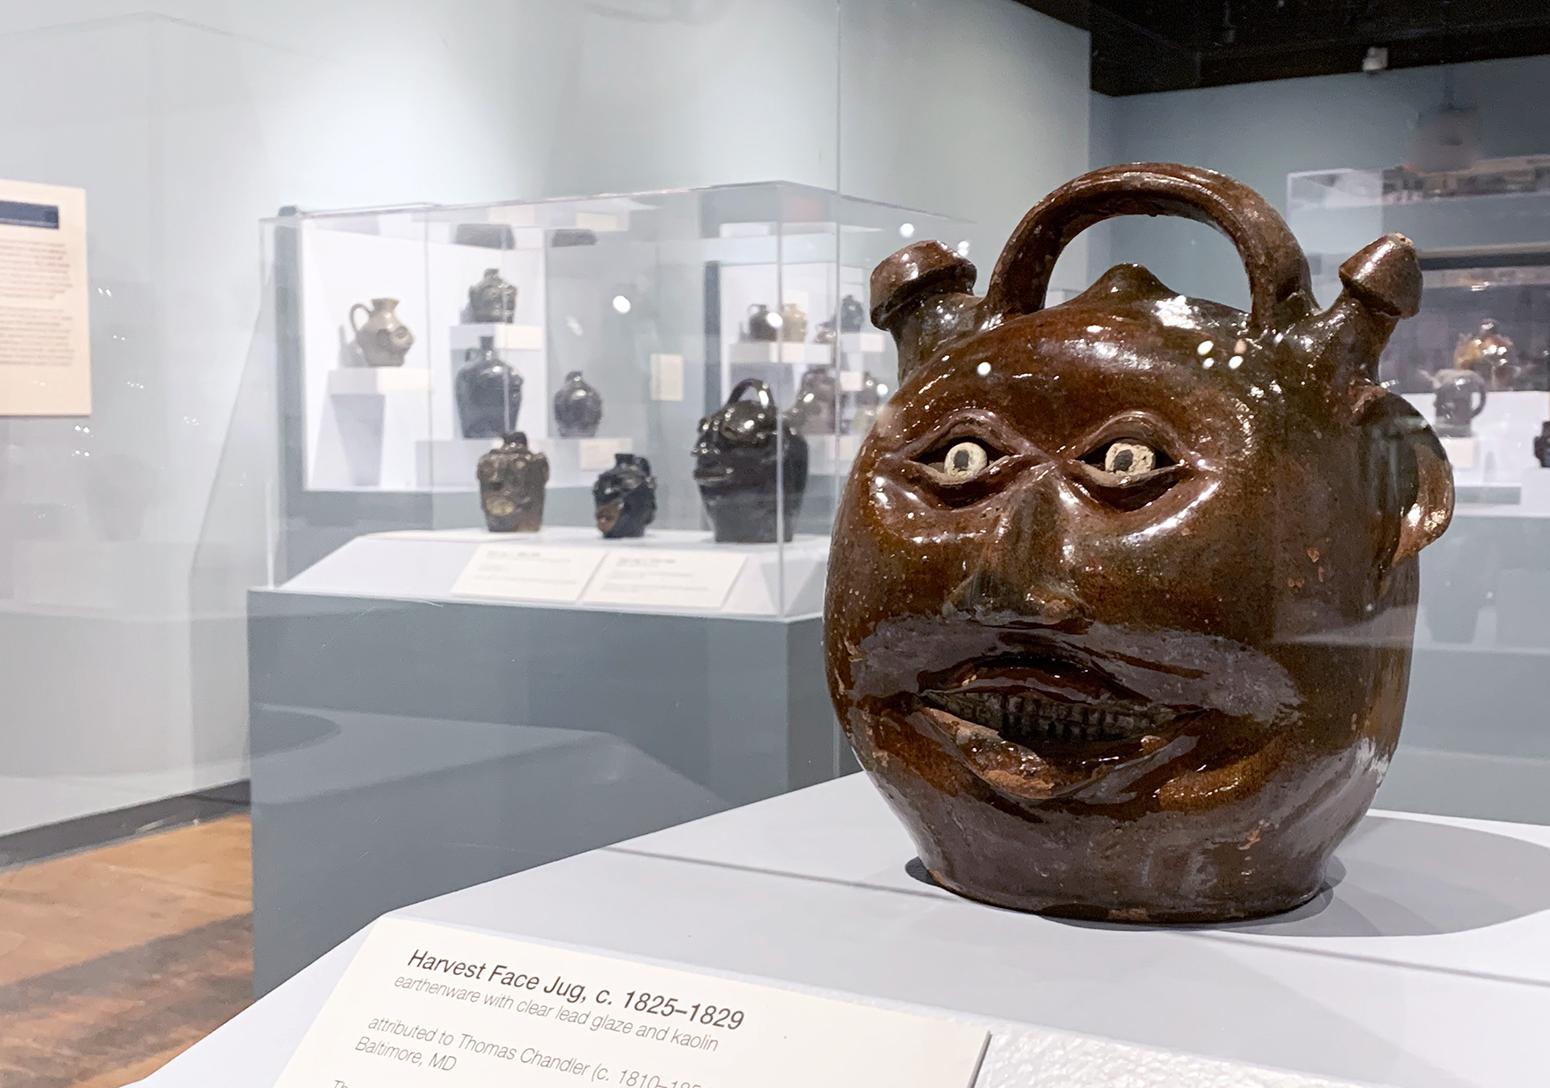 A jug with eyes, nose and mouth.